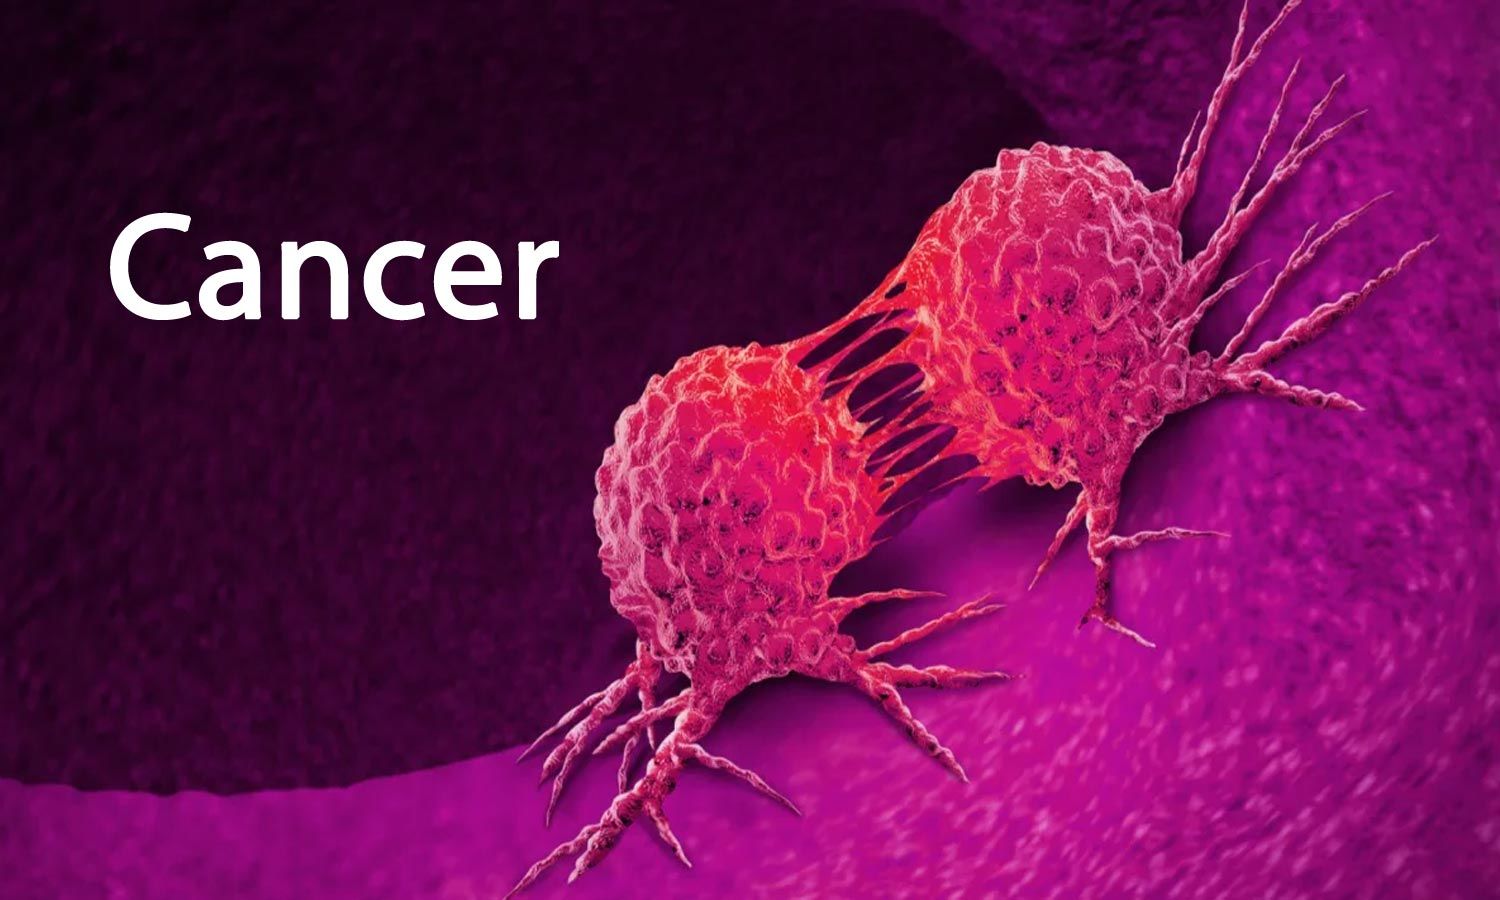 Cancer: Everything about cancer, symptoms, diagnosis, and treatment